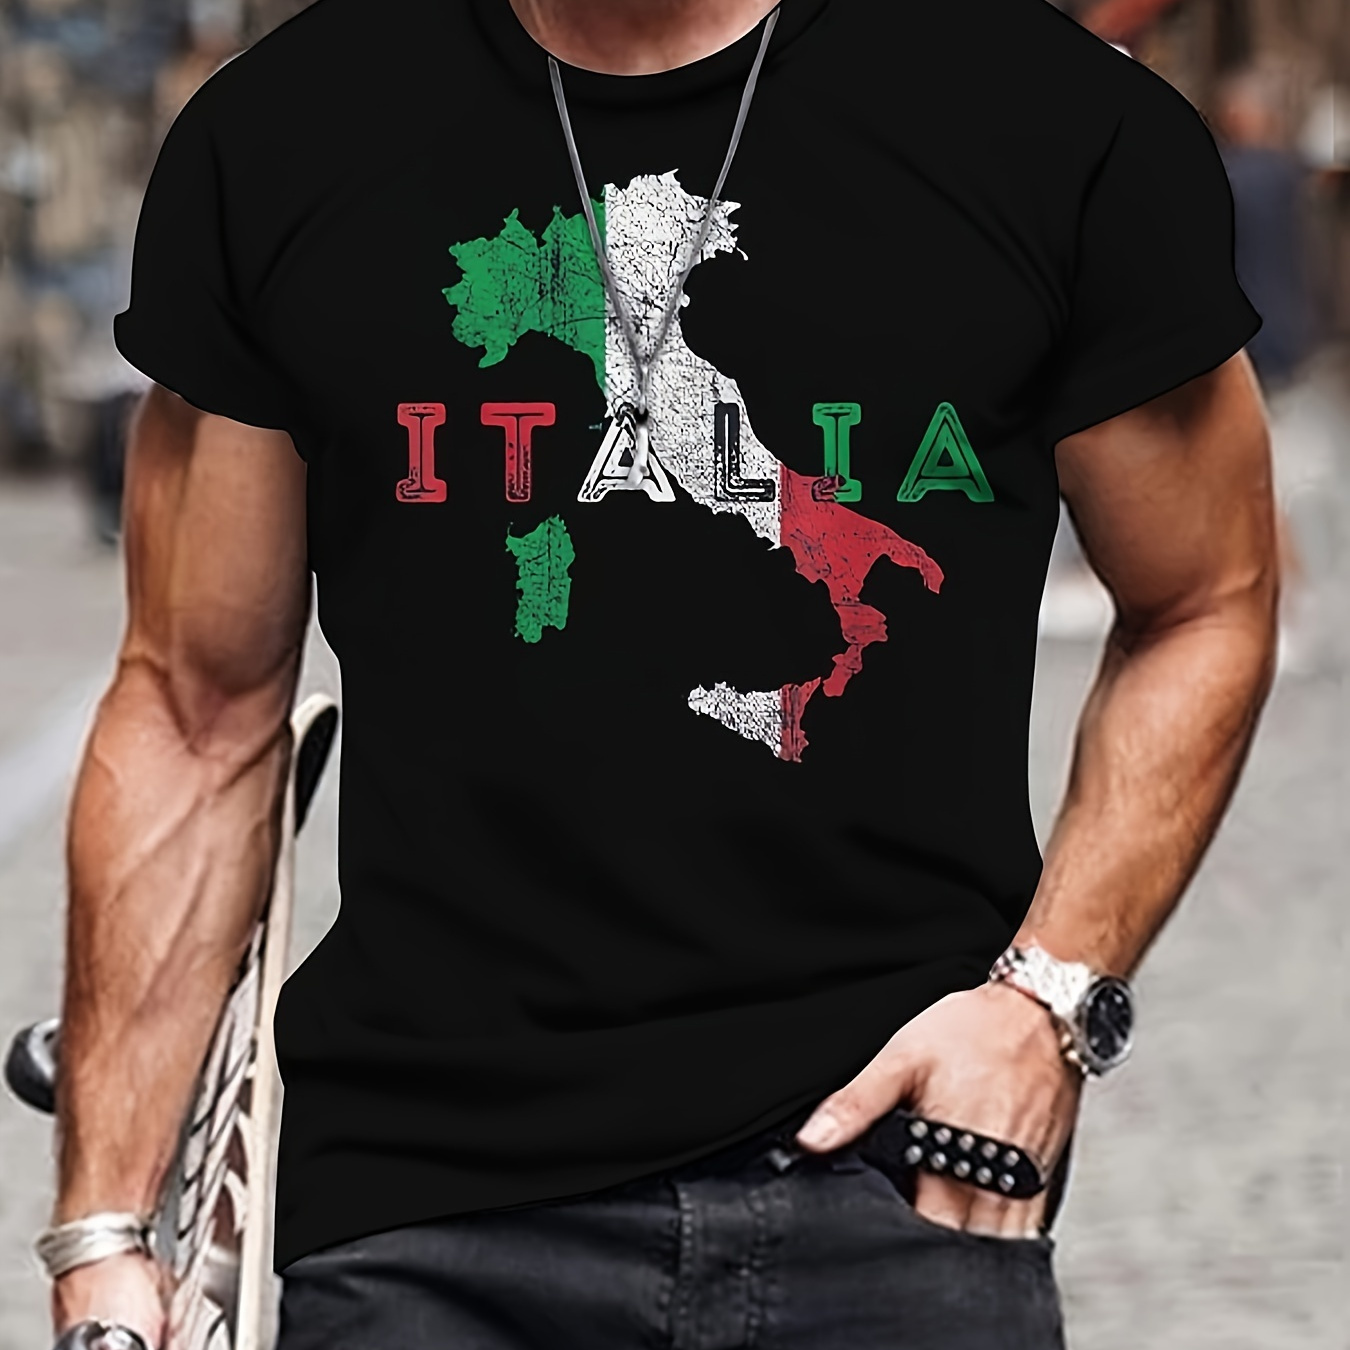 

Men's Italian Color Block And Map Pattern And Letter Print "italia" Crew Neck Short Sleeve T-shirt, Casual And Stylish Tops For Summer Outdoors And Holiday Wear